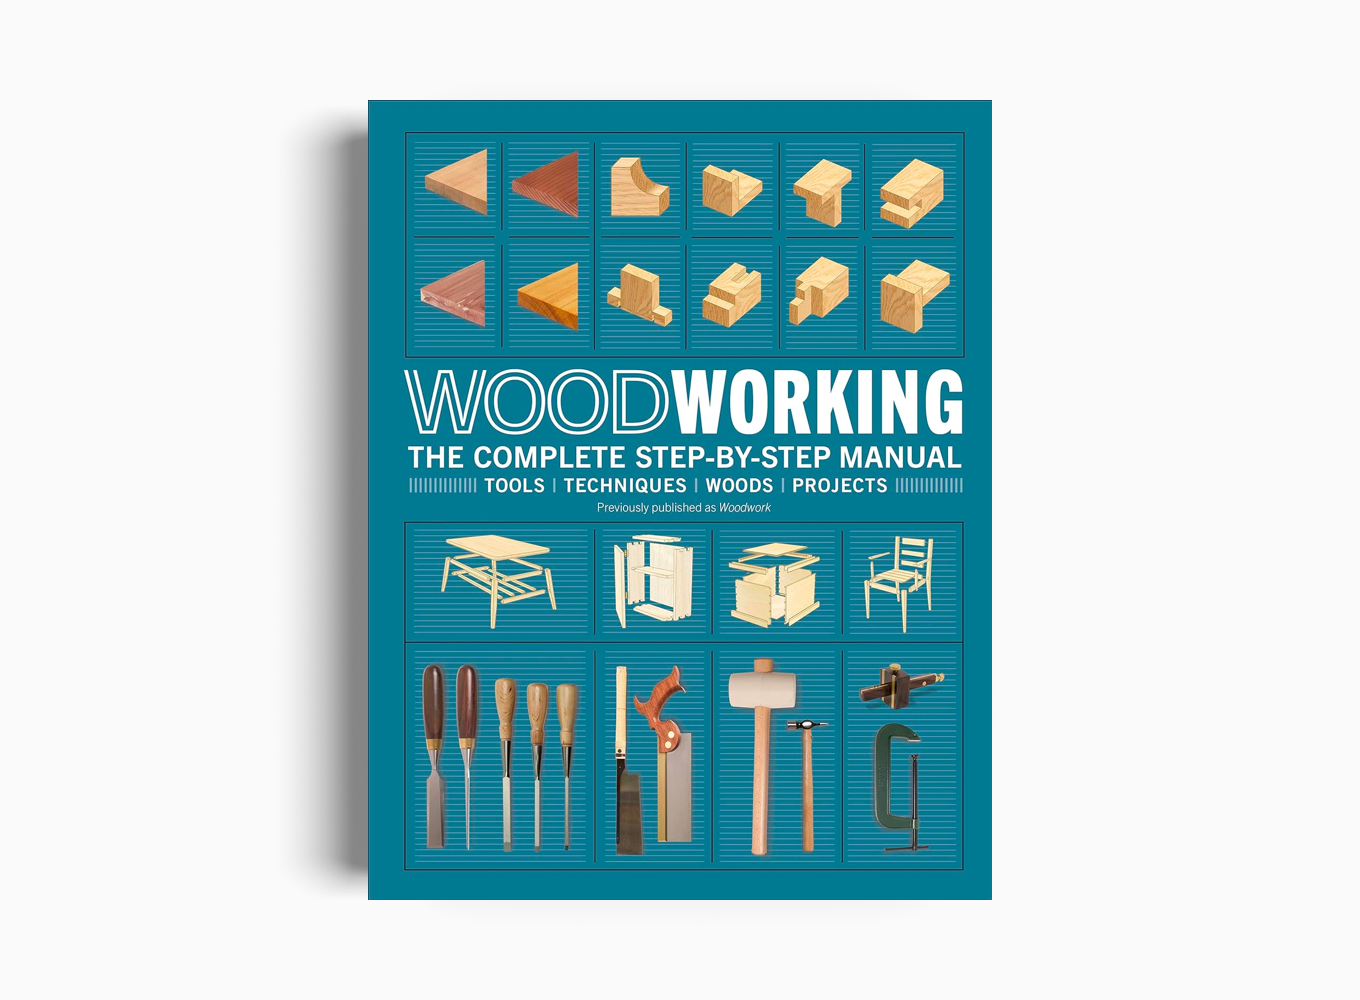 WOODWORKING MANUAL